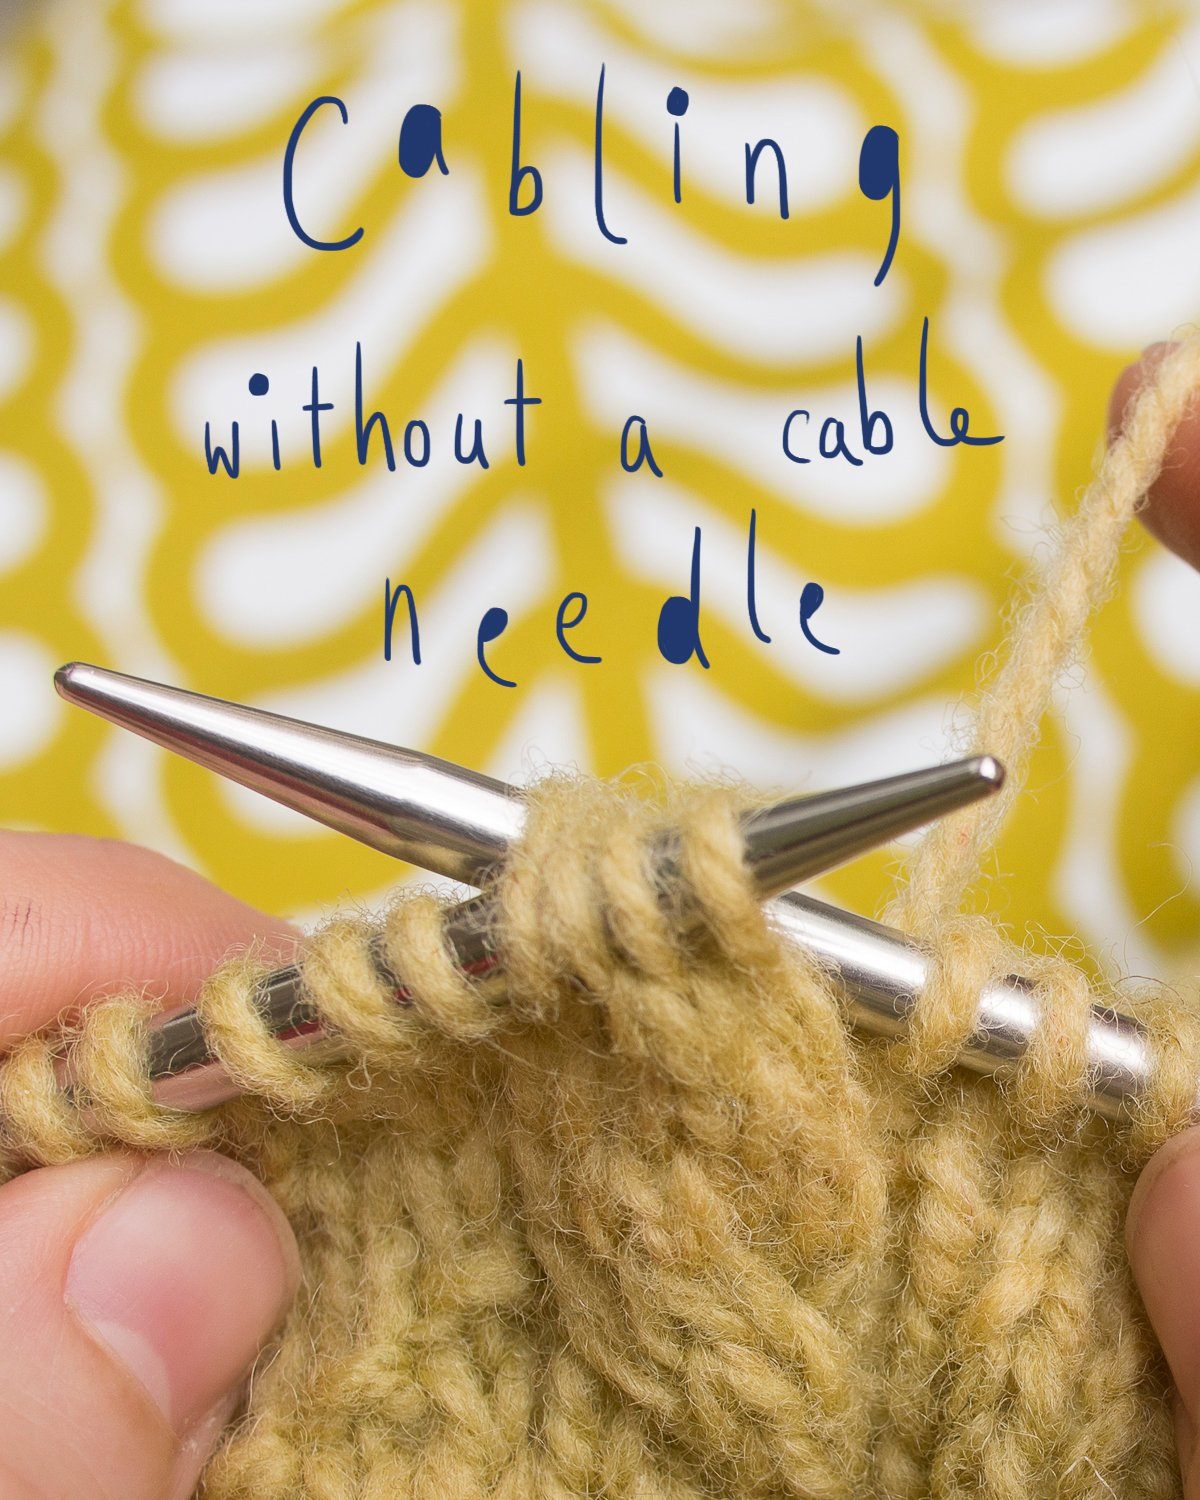 Cabling without a cable needle - Ysolda